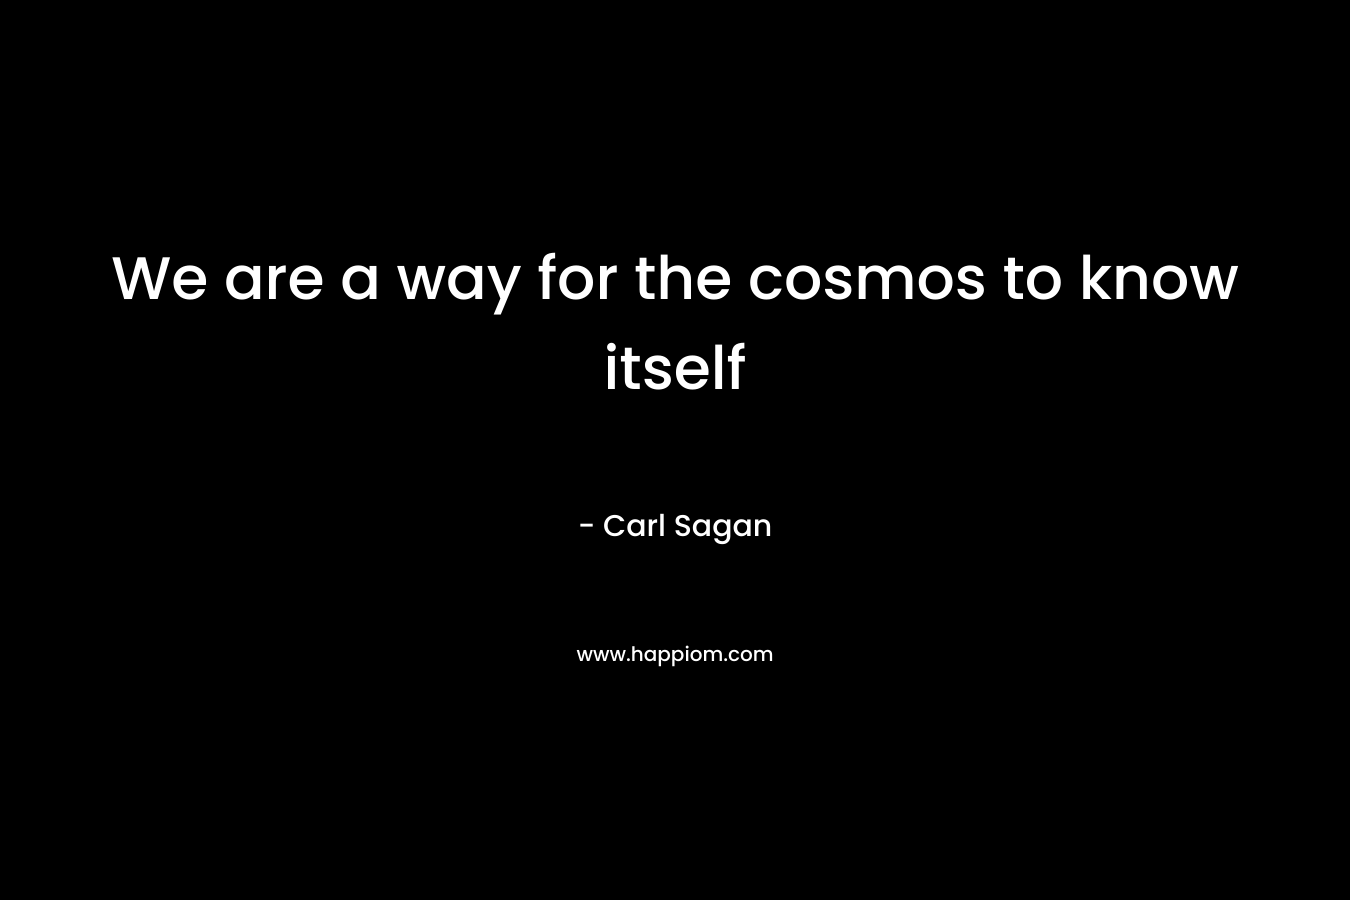 We are a way for the cosmos to know itself